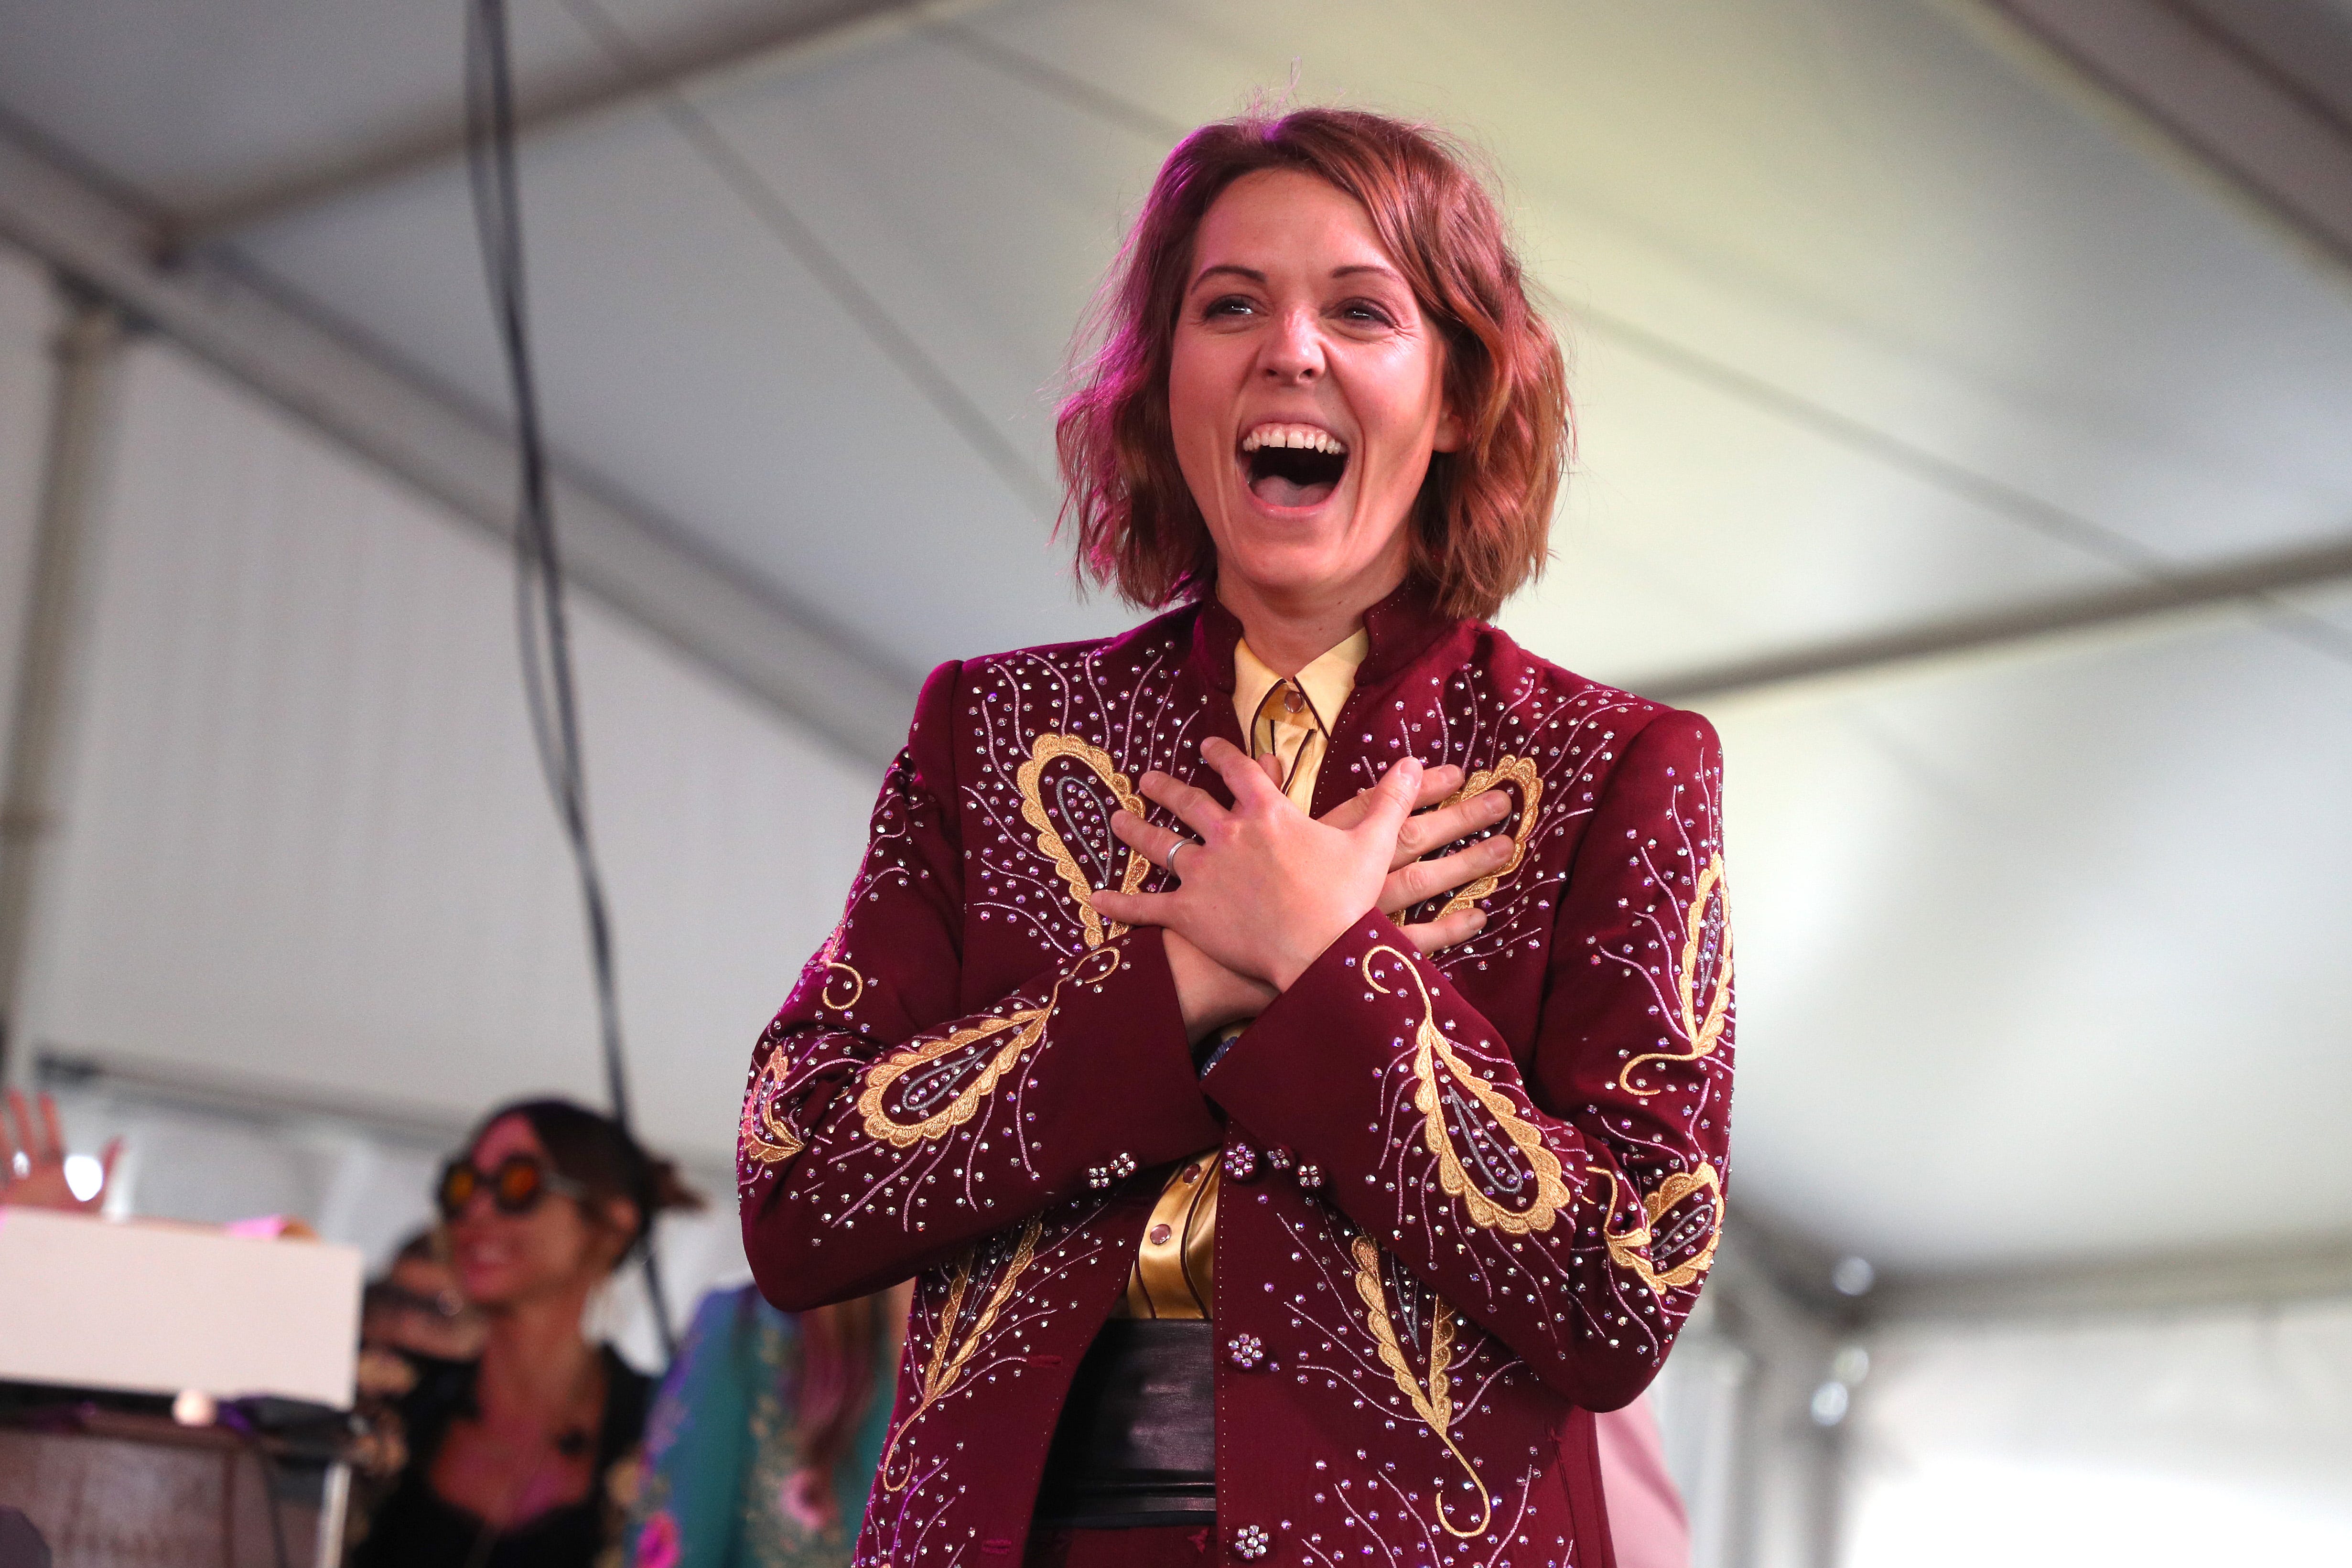 Brandi Carlile and her wife had to get imaginative as moms-to-be